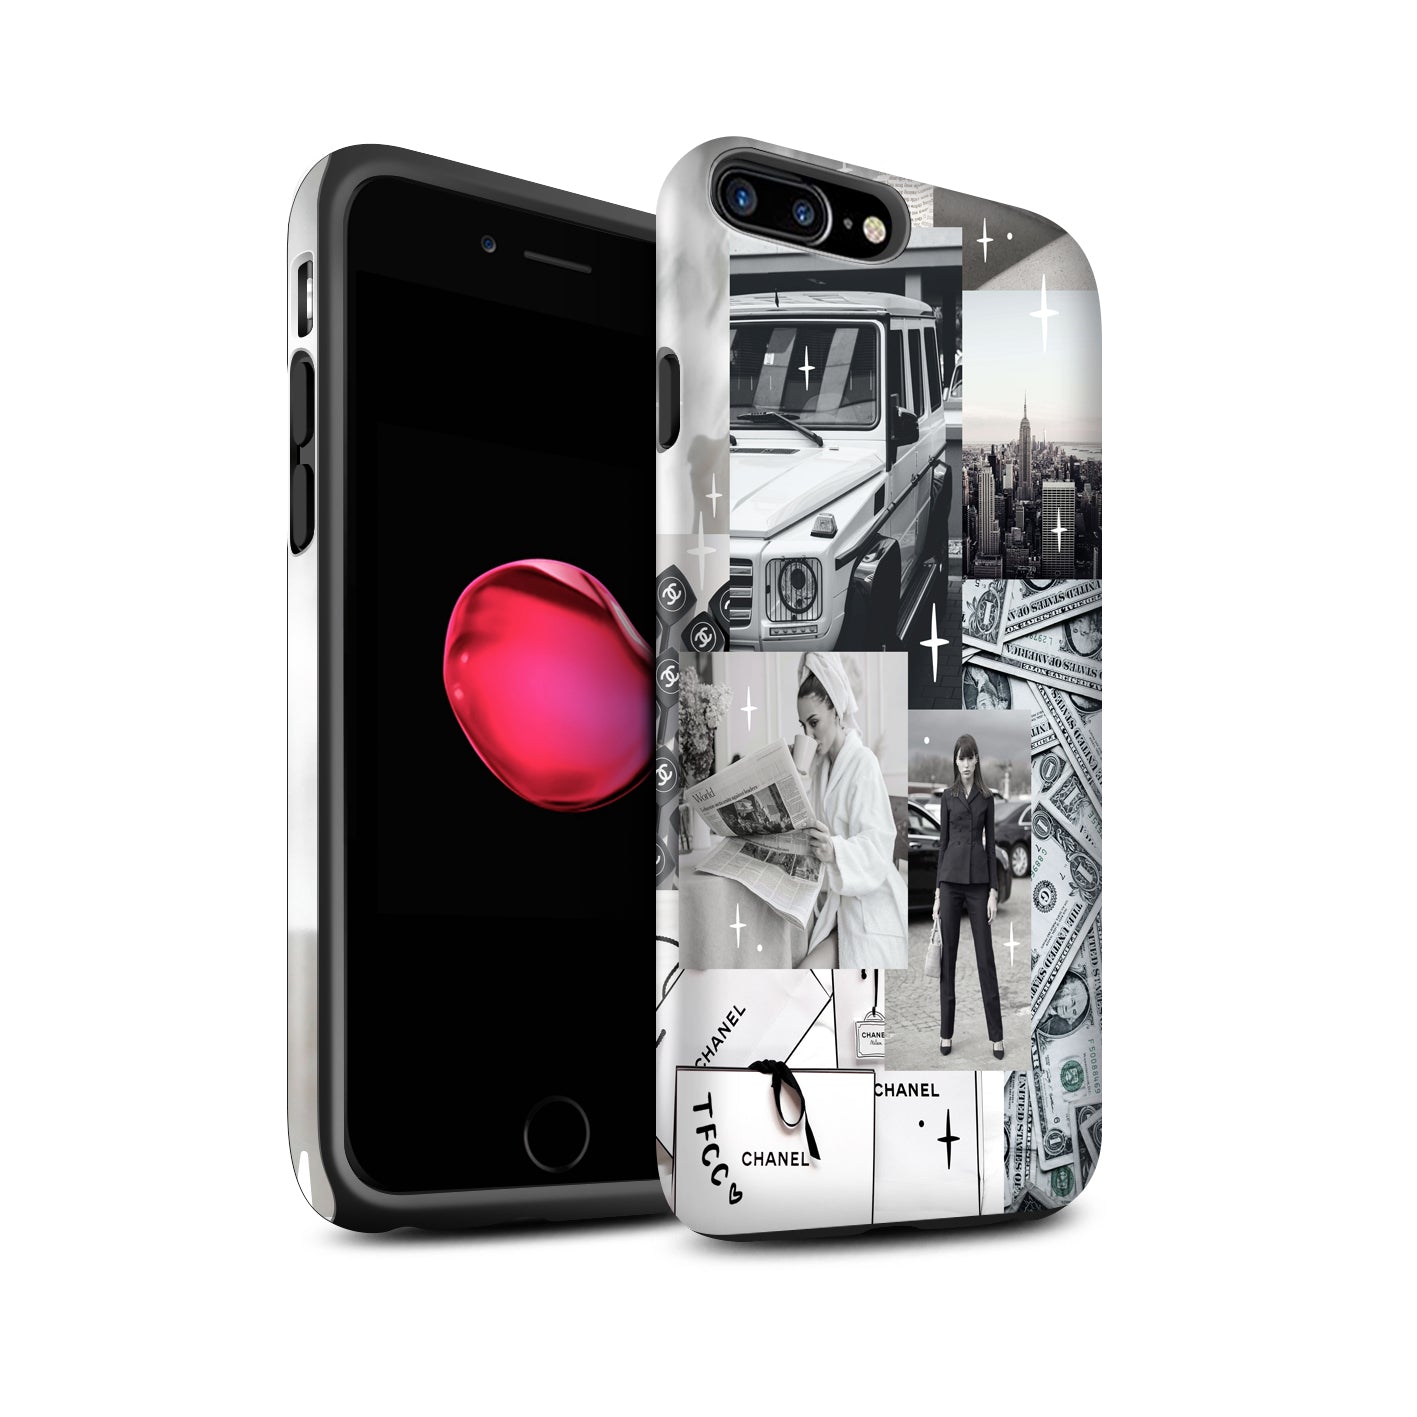 CC COLLAGE CASE - thefonecasecompany